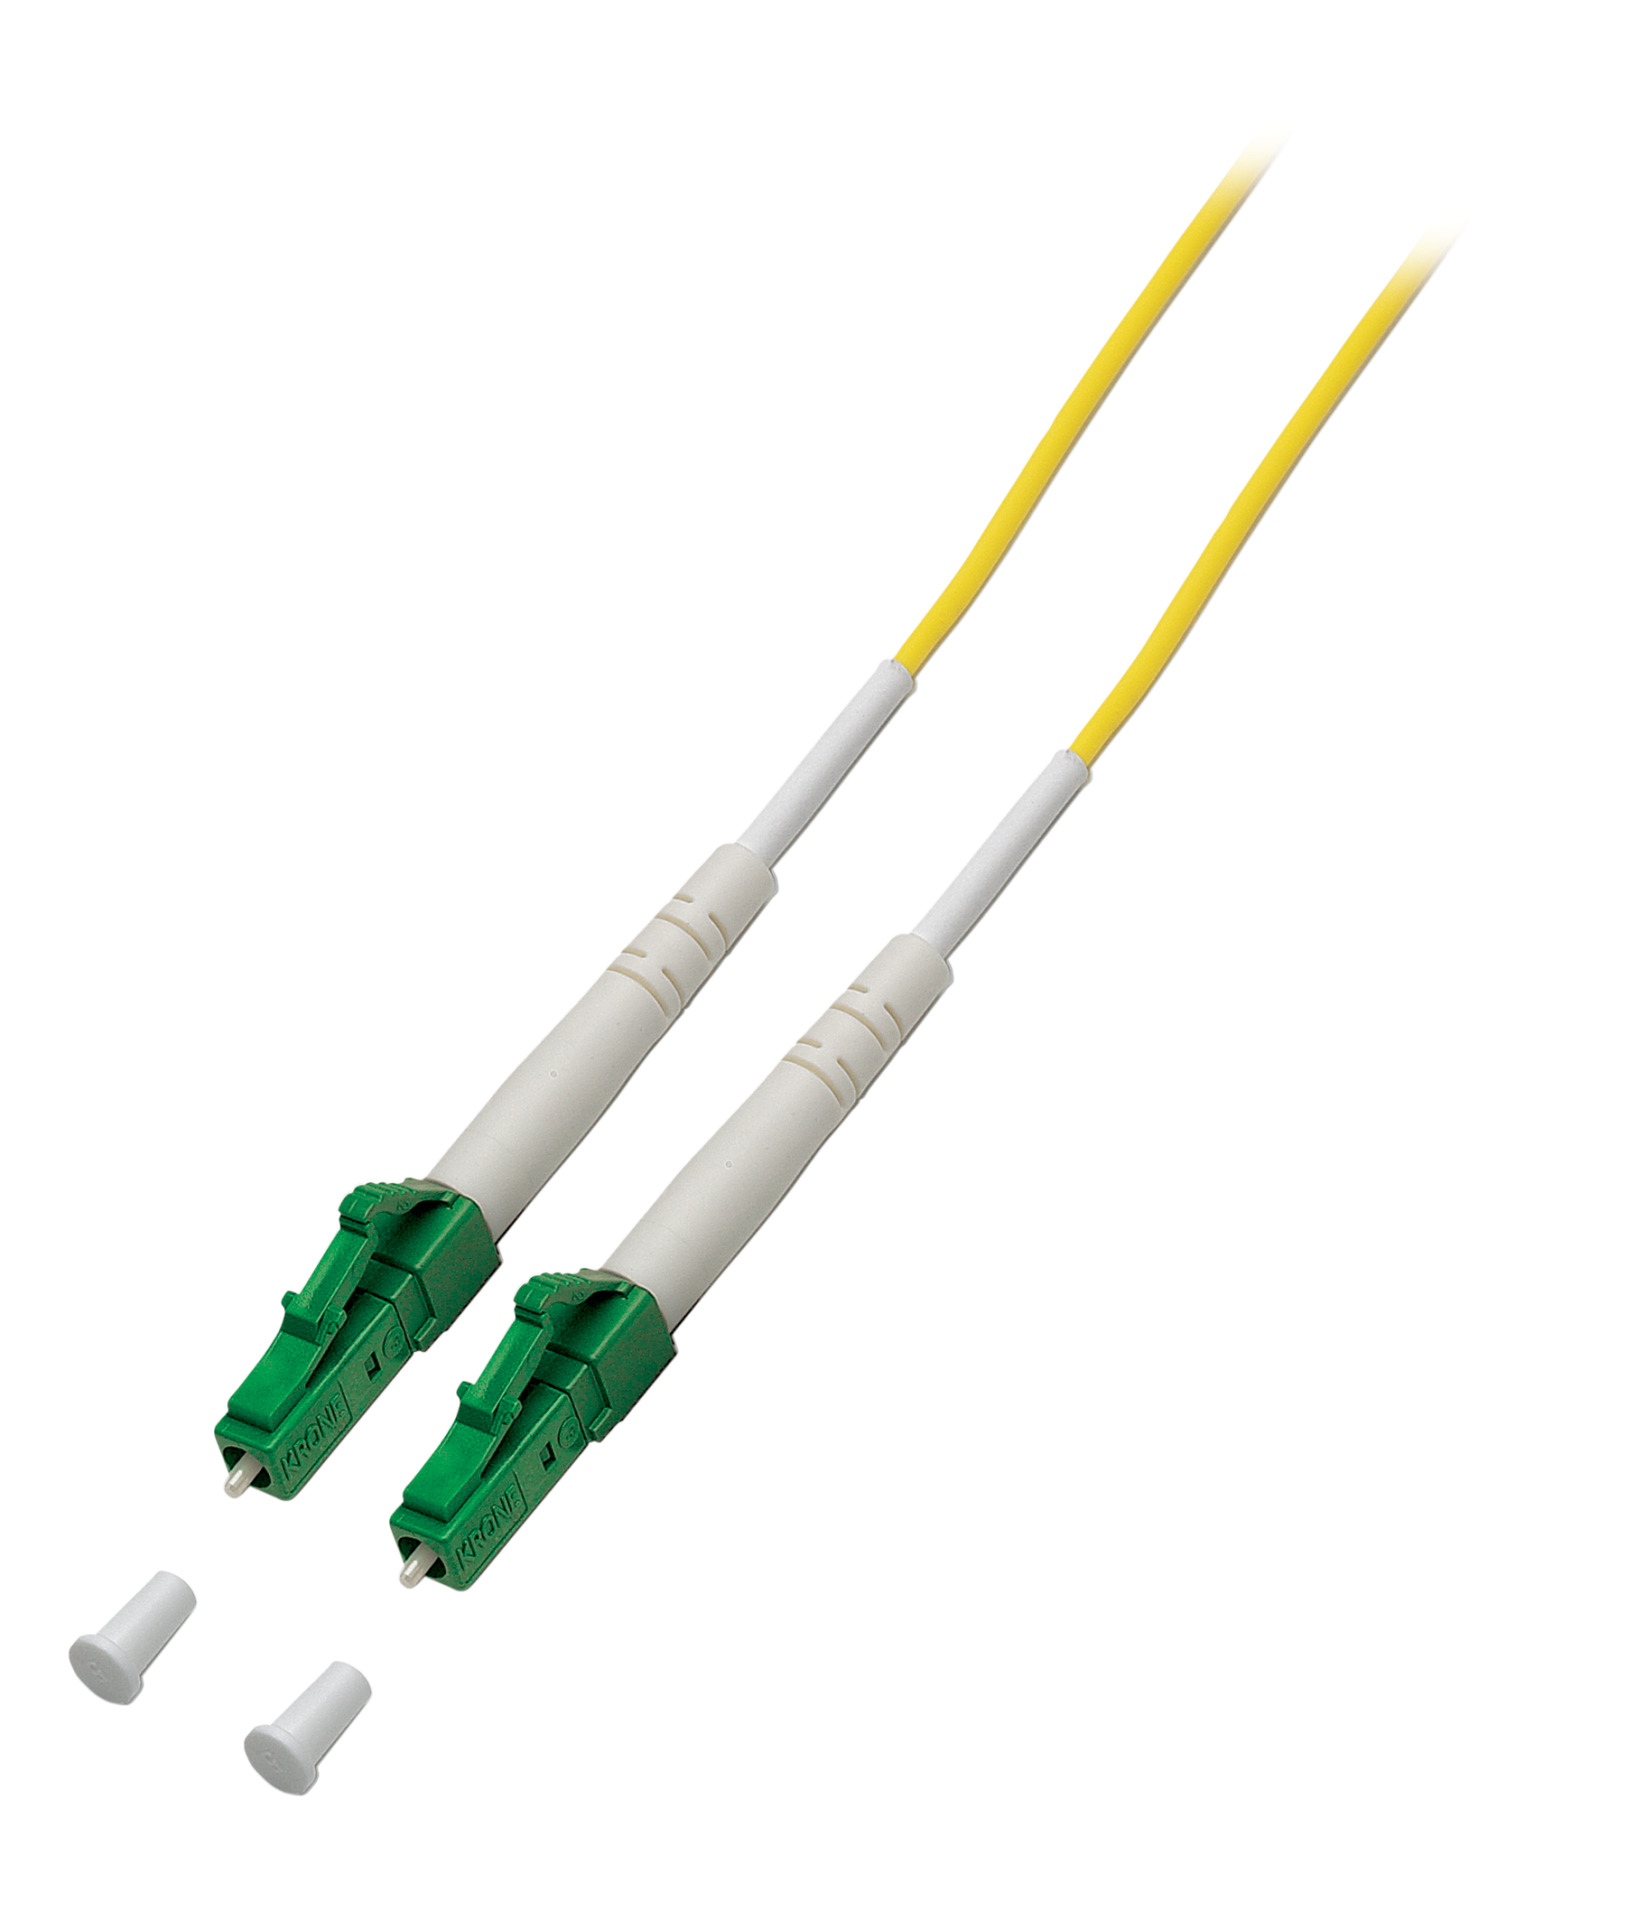 Simplex FO Patch Cable LC/APC-LC/APC G657.A2 10m 2,0mm yellow 9/125µm